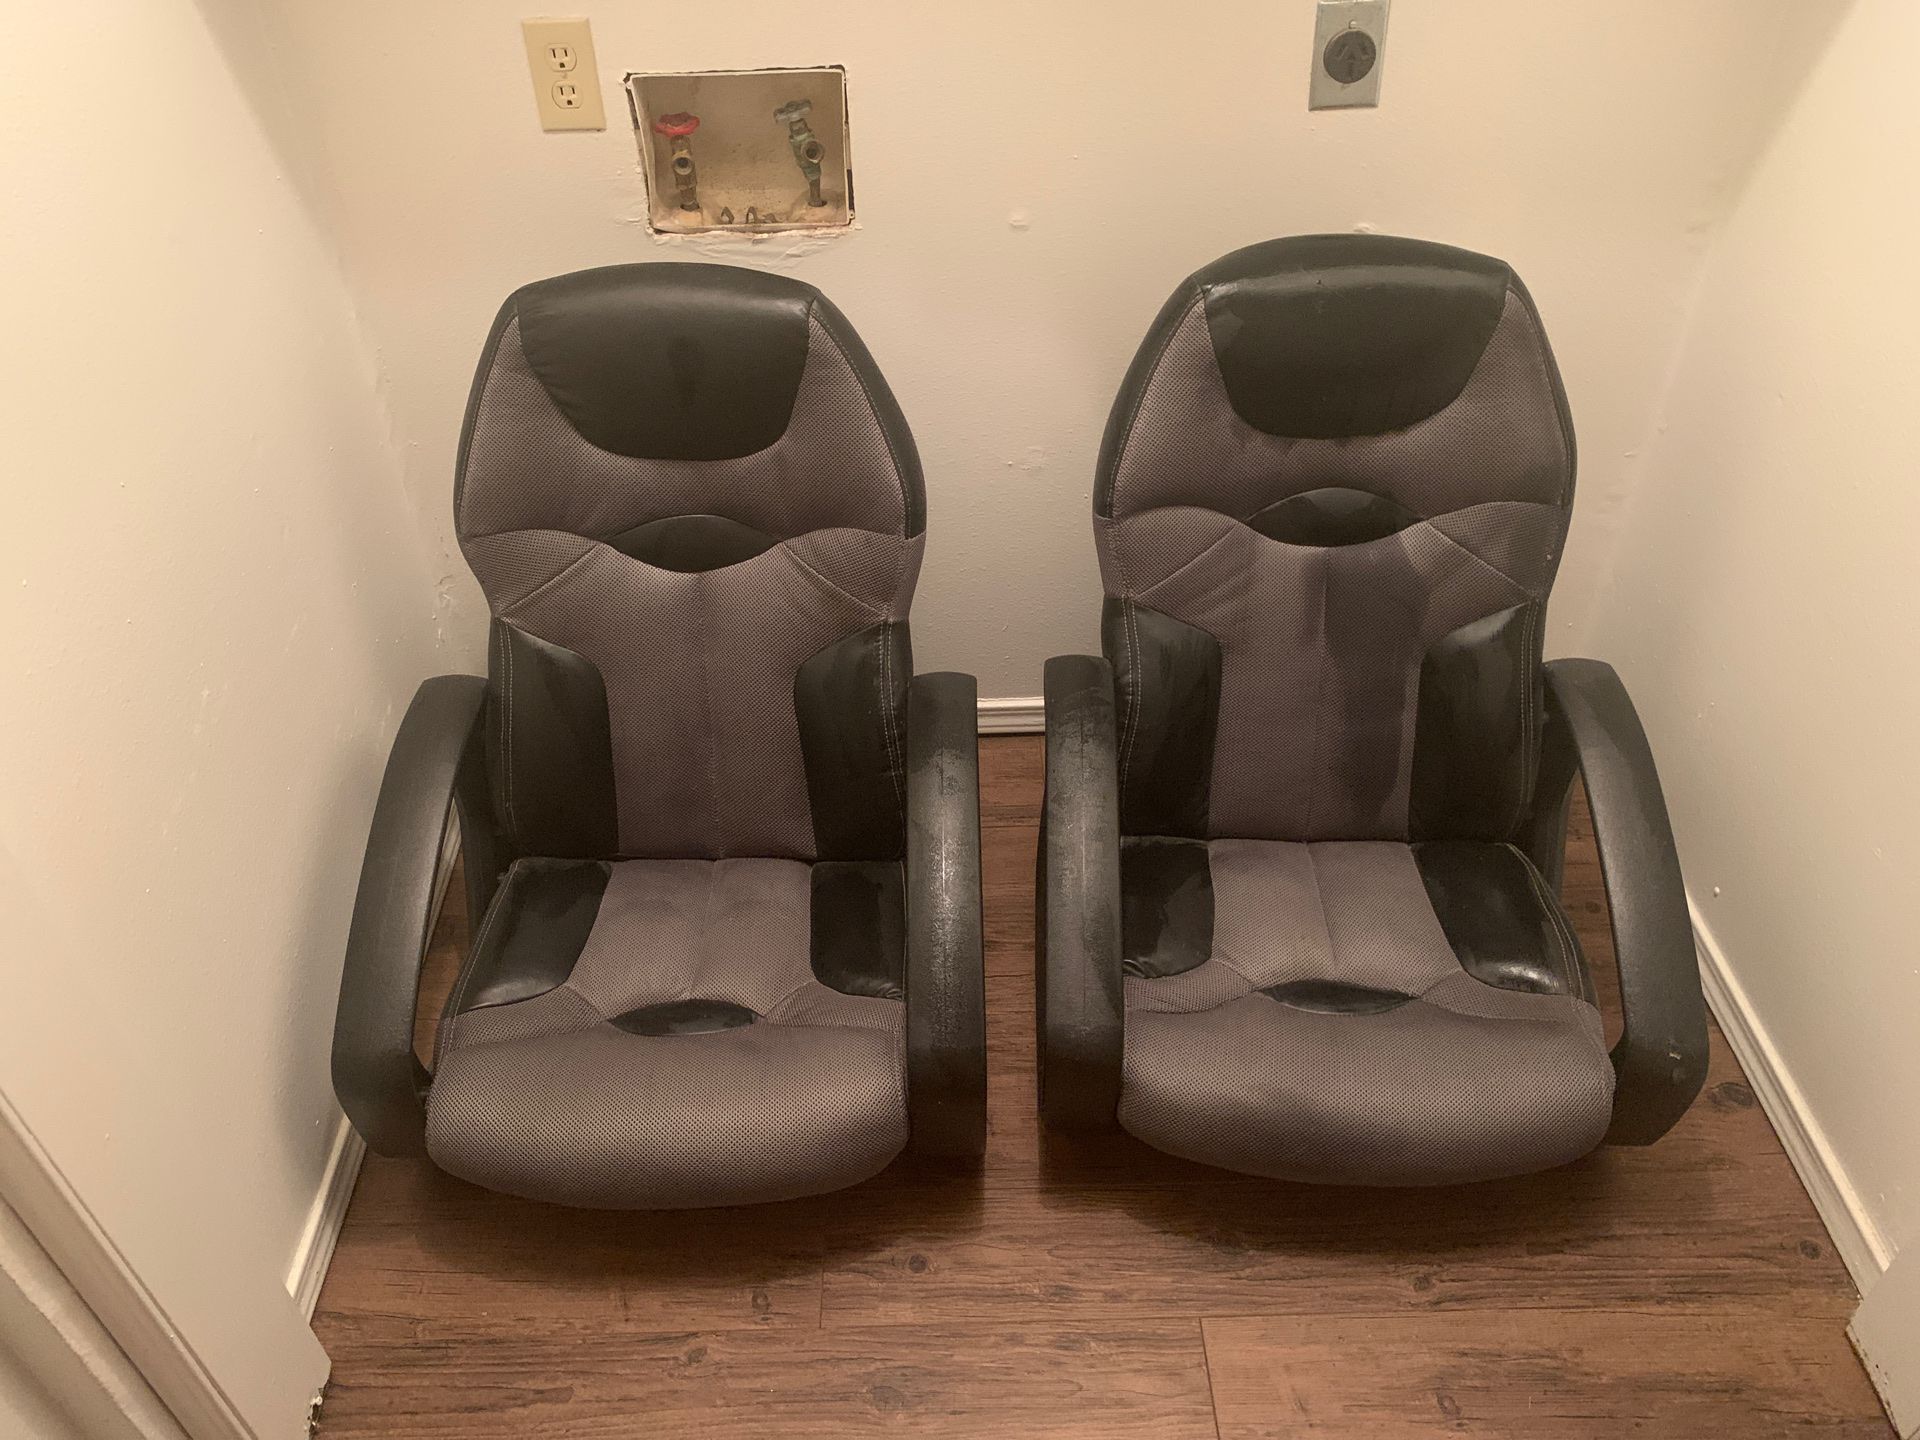 Game chairs